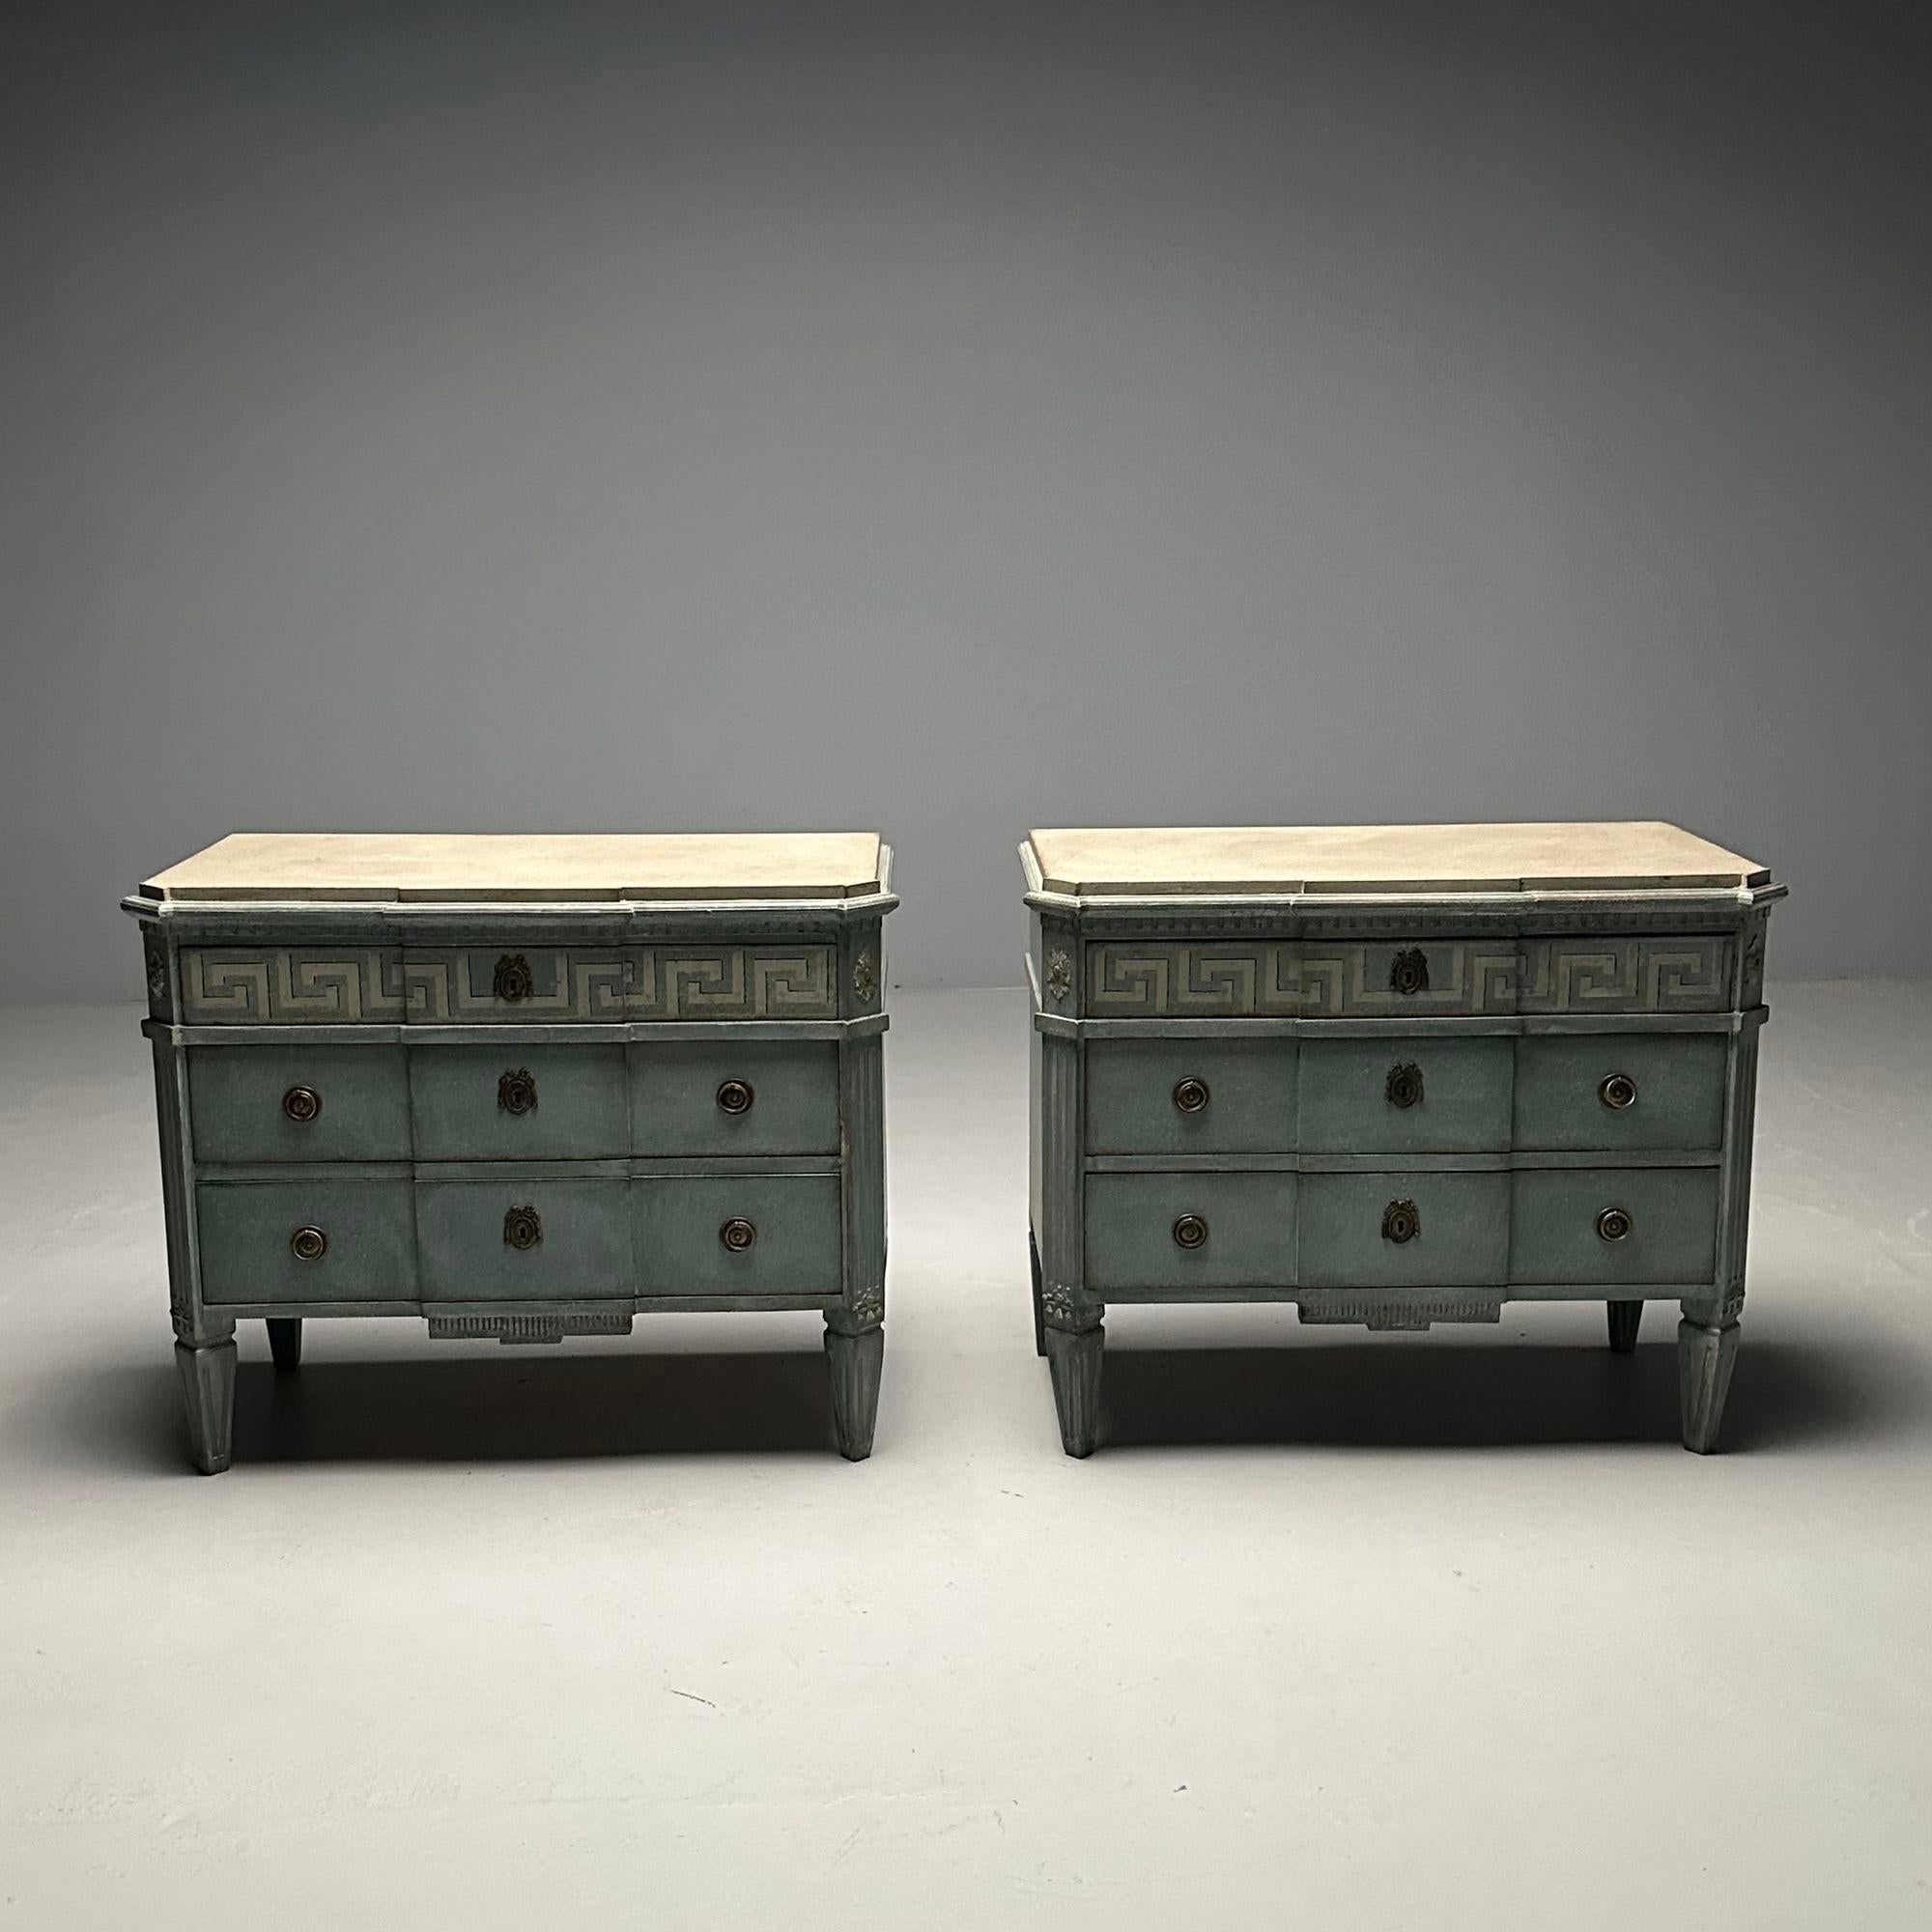 Gustavian, Swedish Commodes, Chests or Nightstands, Blue Paint Distressed, Brass, Sweden, 19th/20th Century

Stunning pair of three drawer chests, commodes or nightstands having a Swedish finish in a alluring parcel white and celeste blue painted